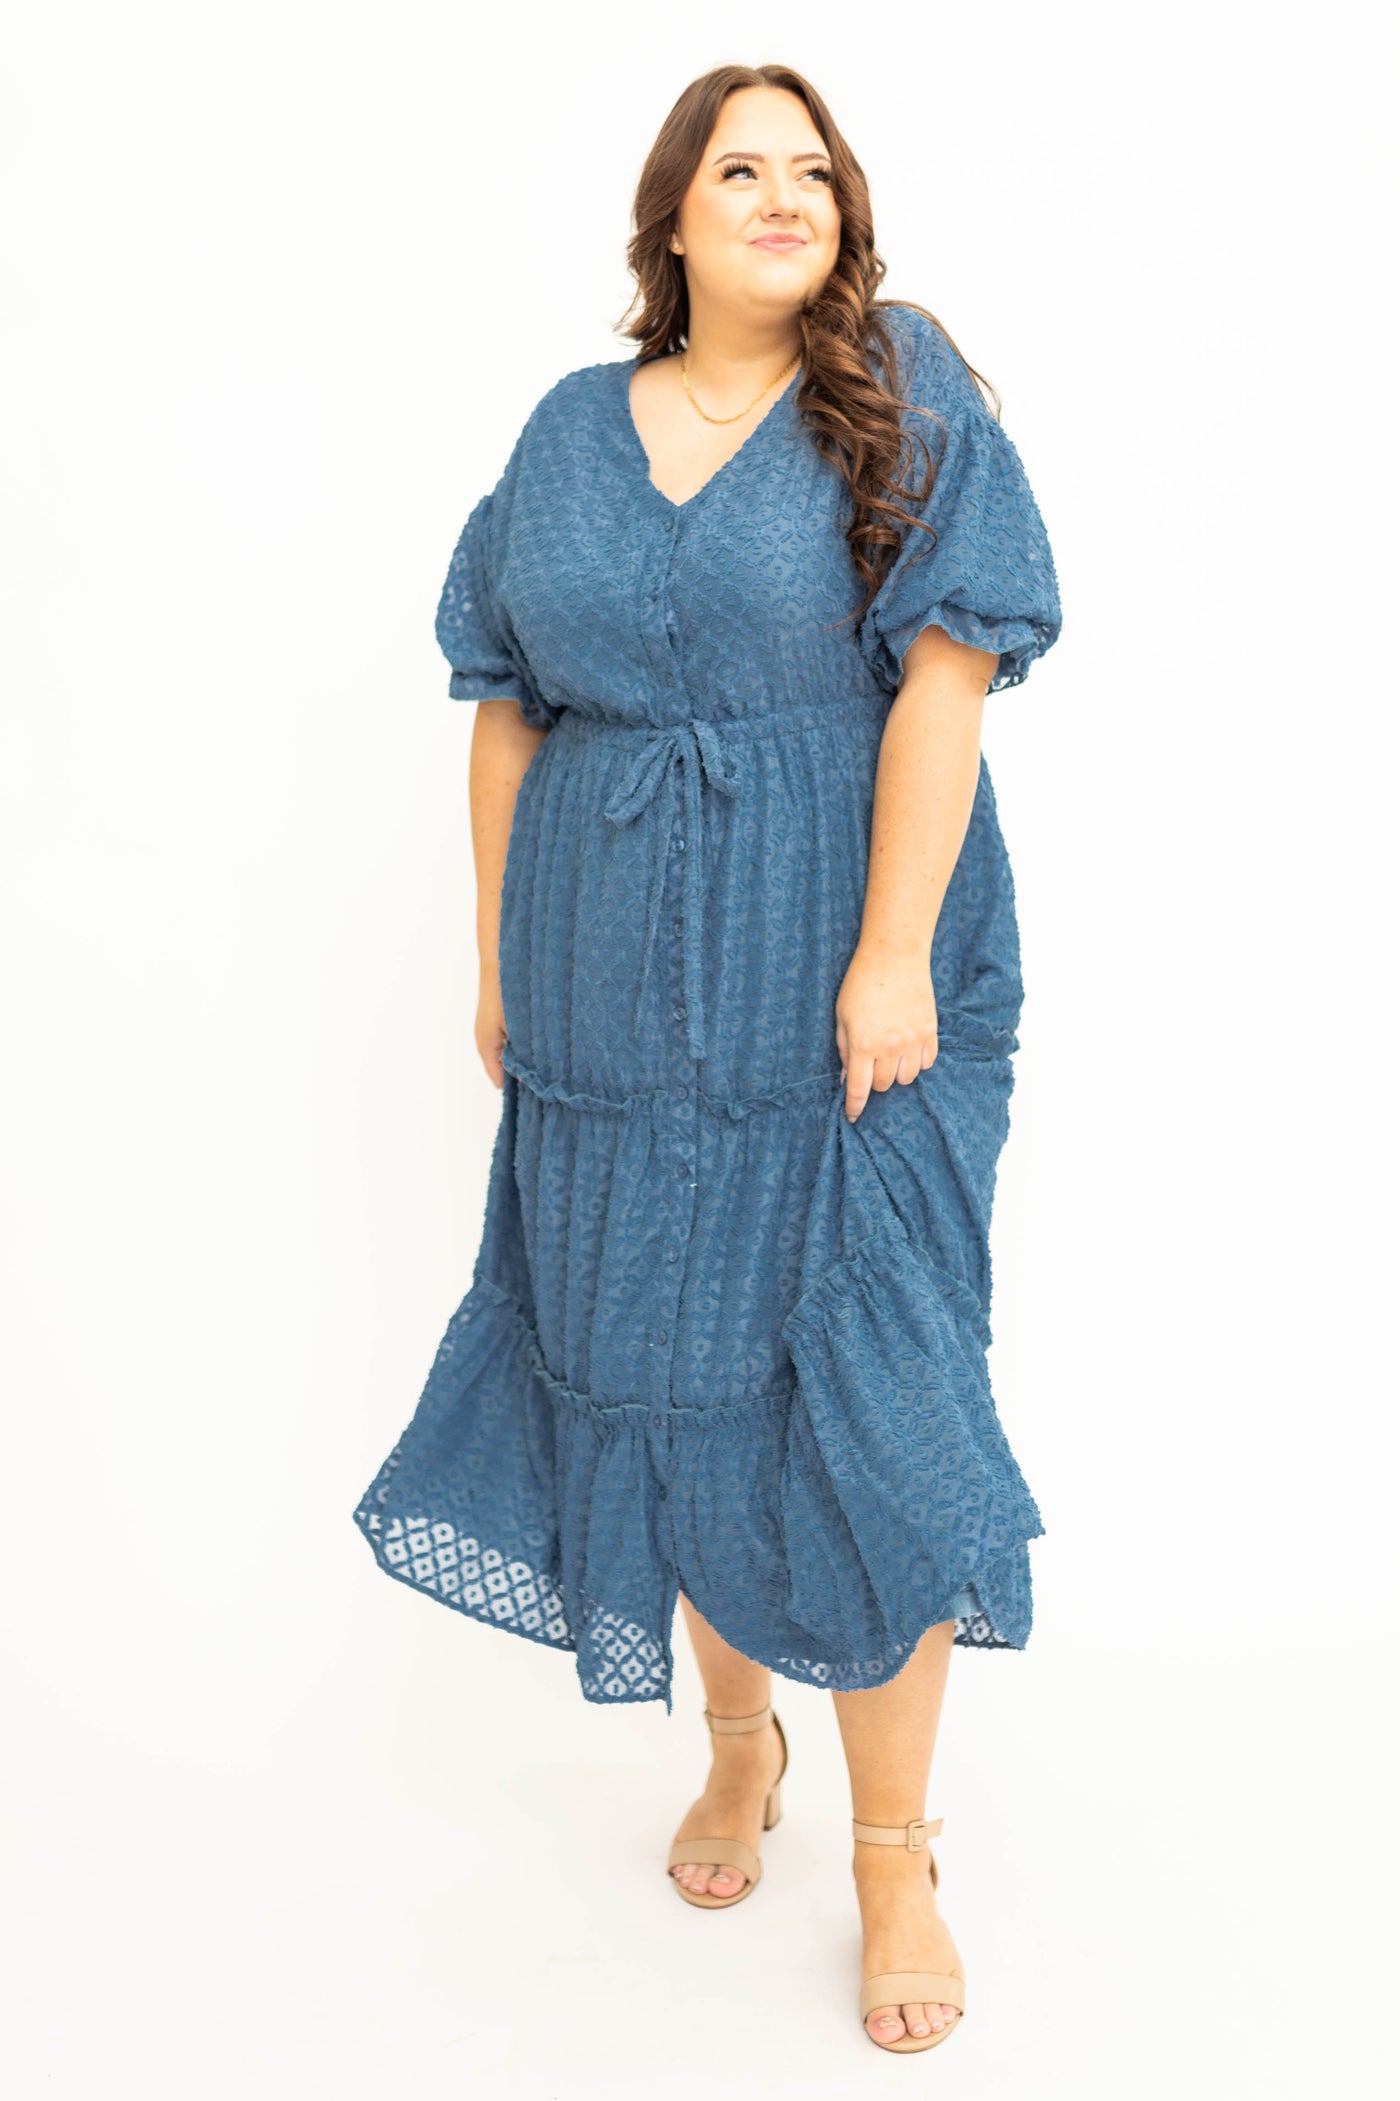 Plus size denim blue dress with buttons on bodice